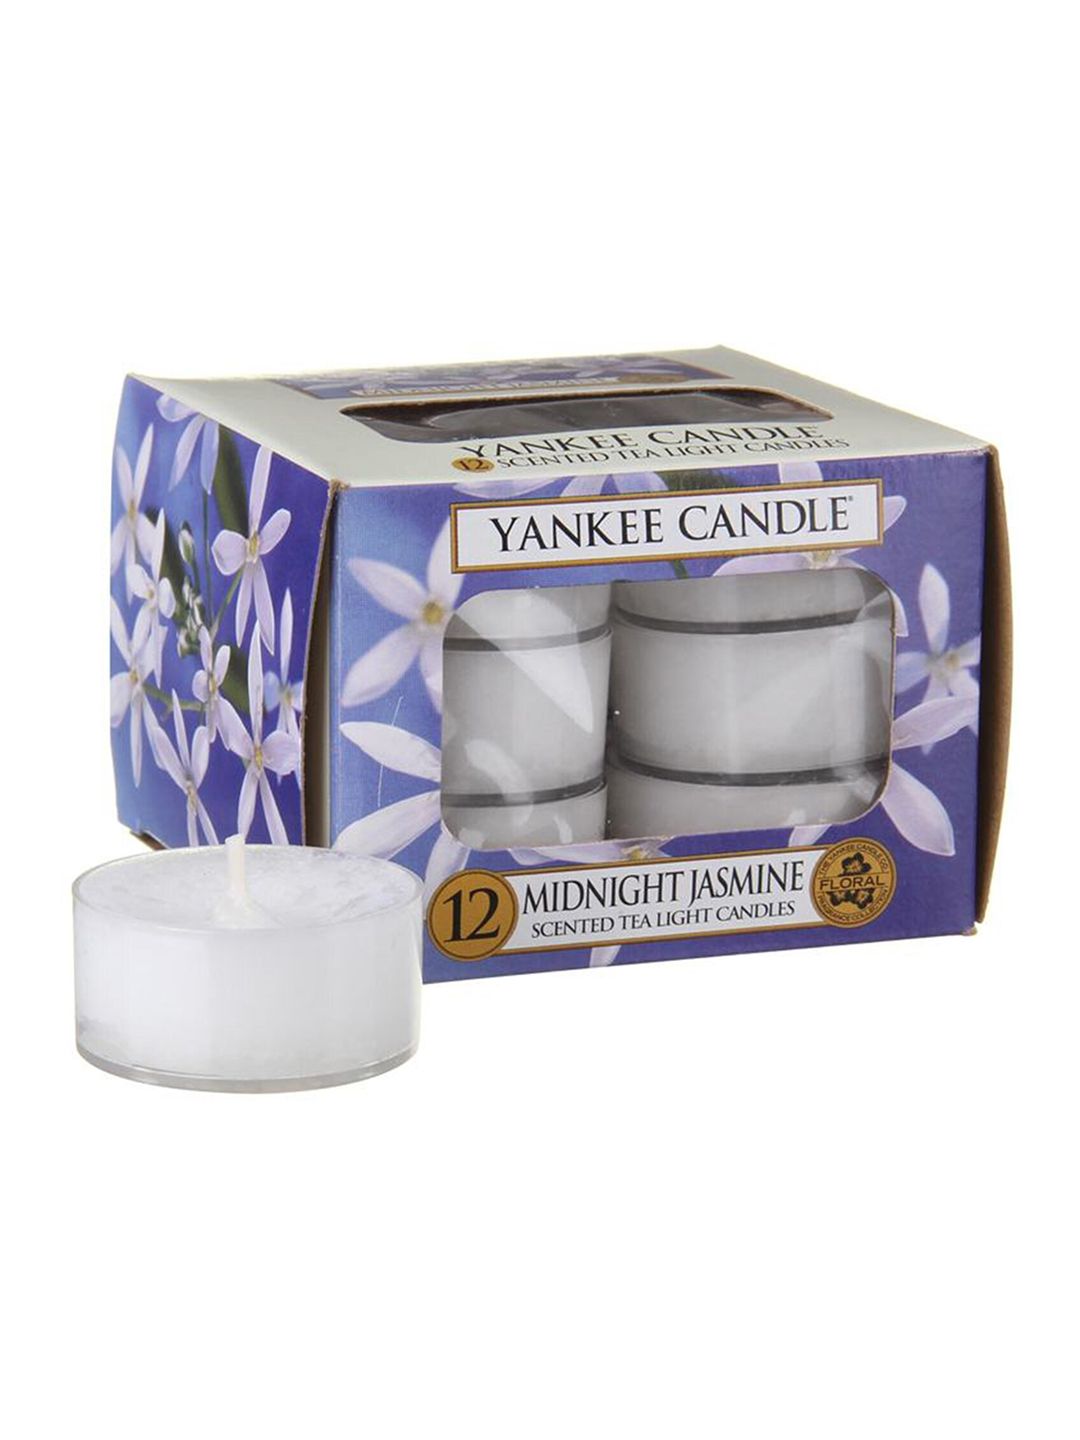 YANKEE CANDLE Set Of 12 White Midnight Jasmine Tealight Candles Price in India